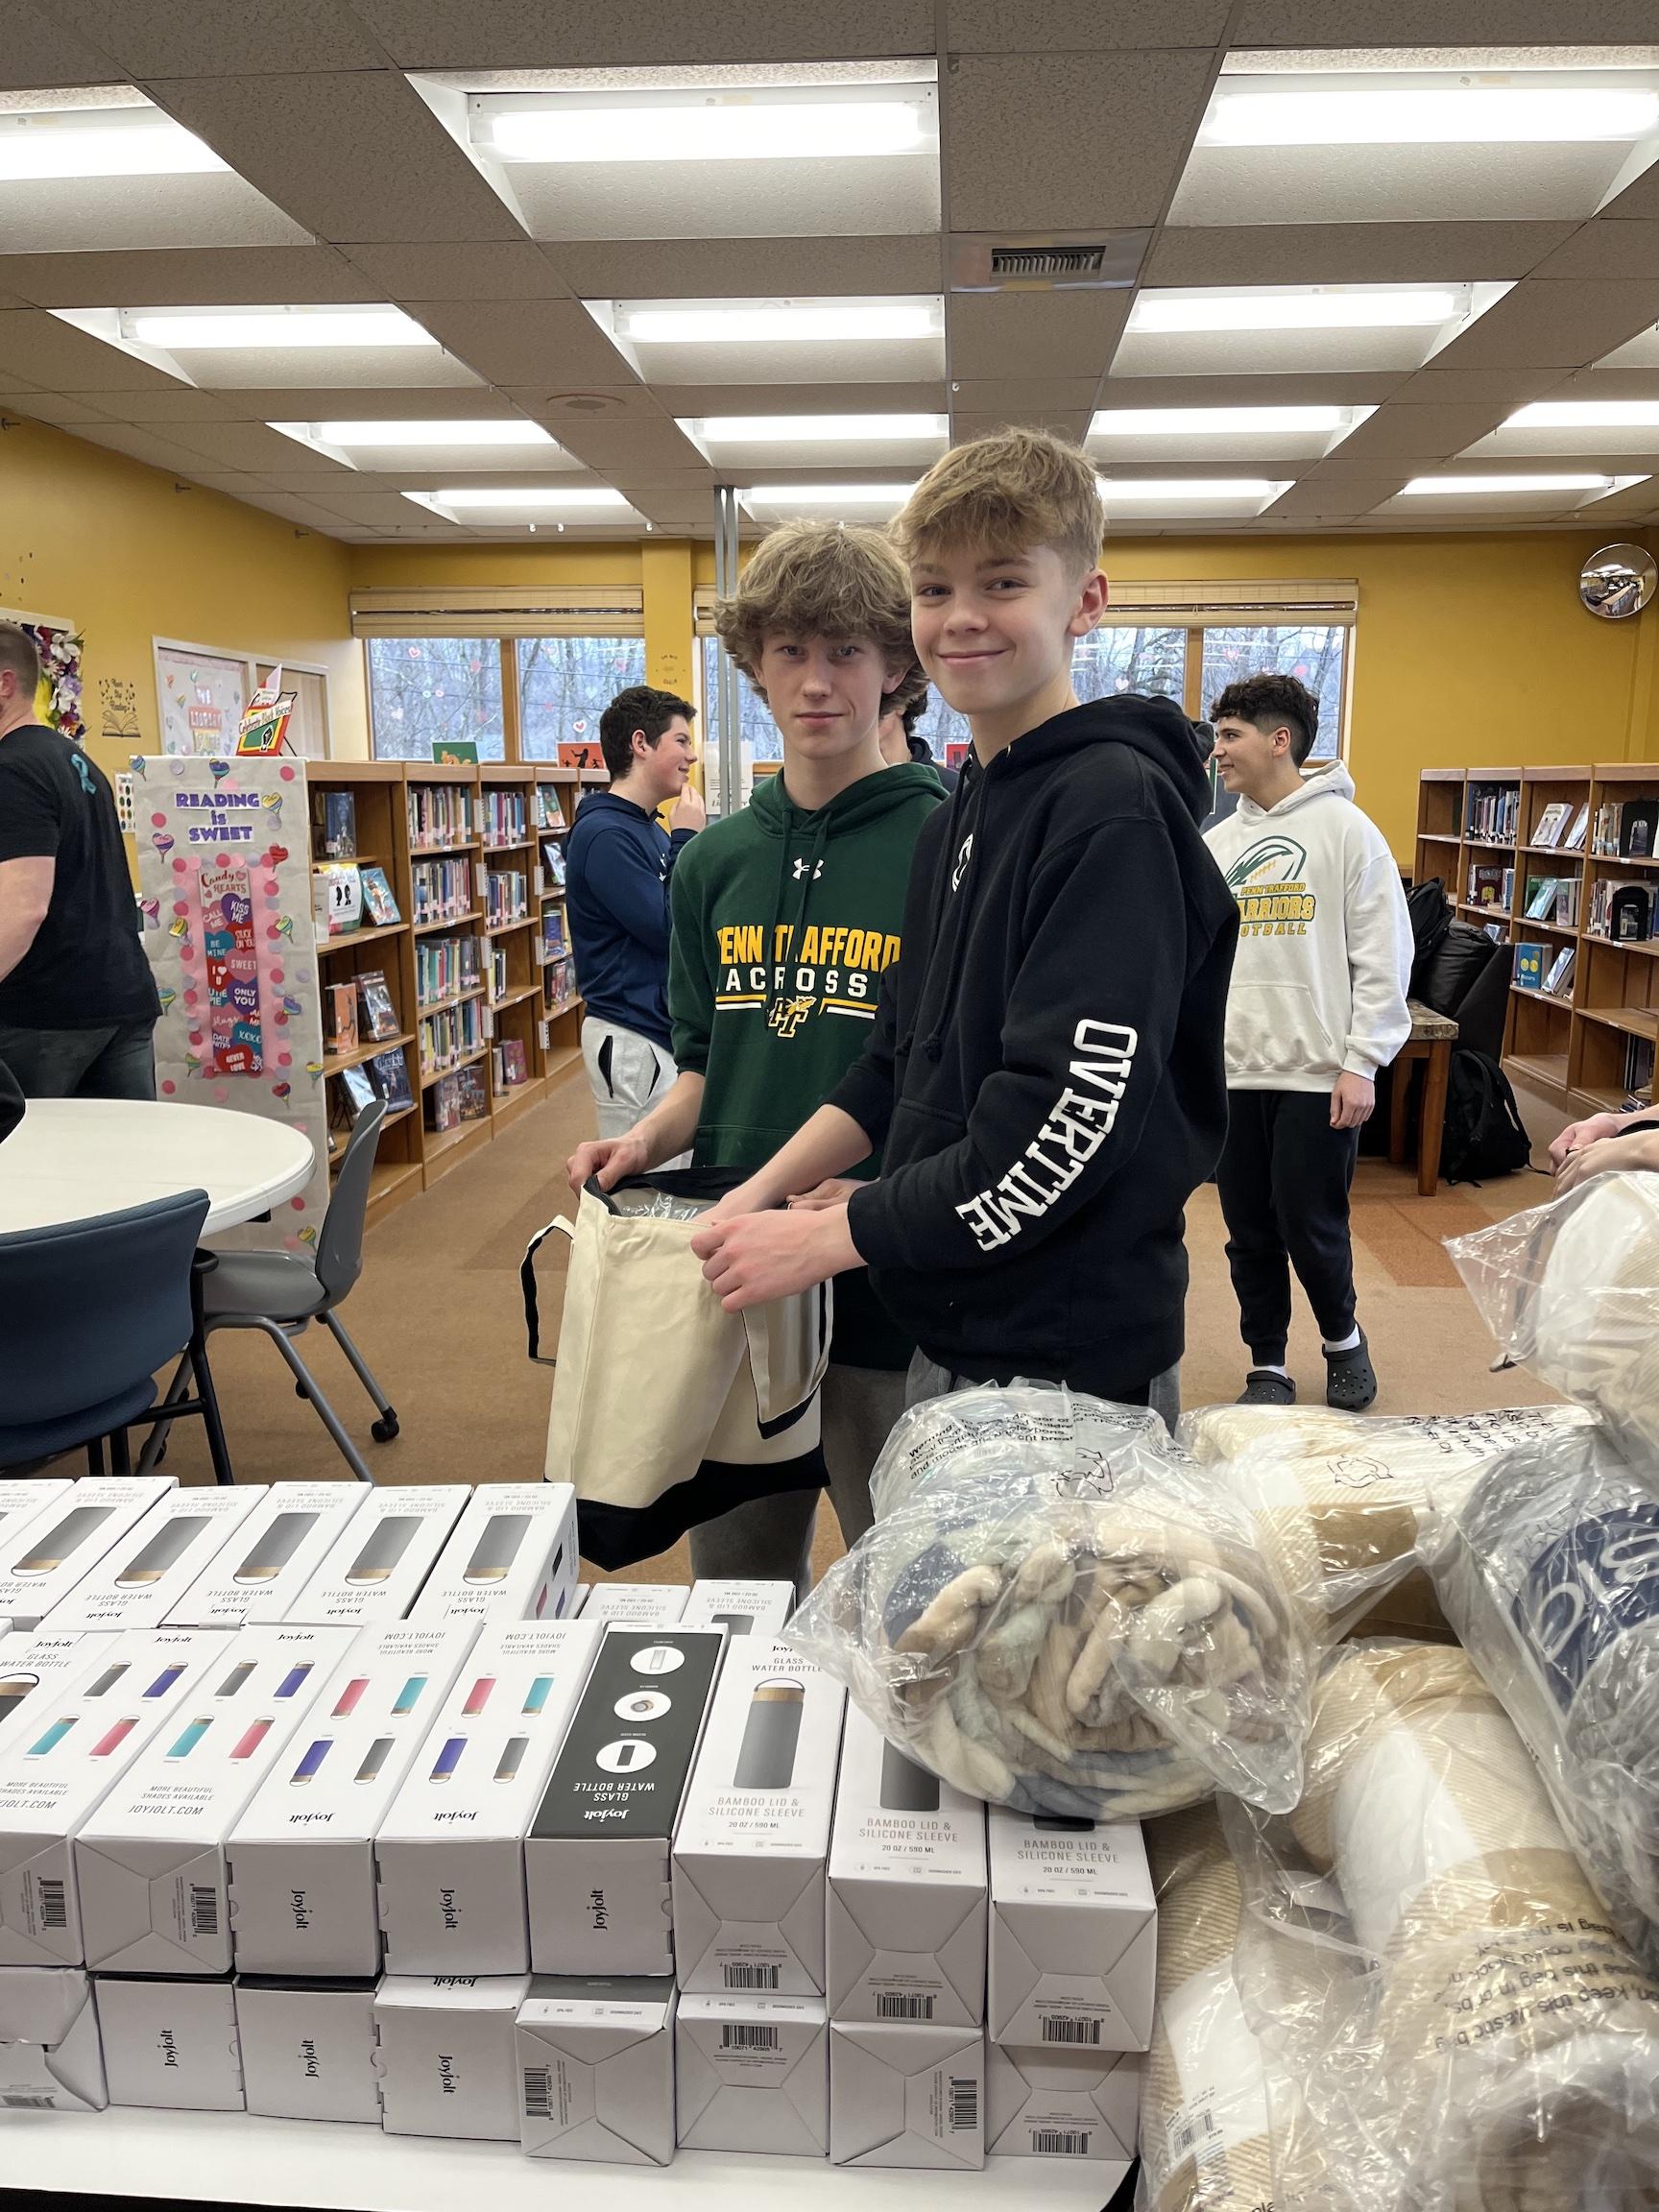 7th-graders Trey Miller and Owen Hodge work on the assembly line